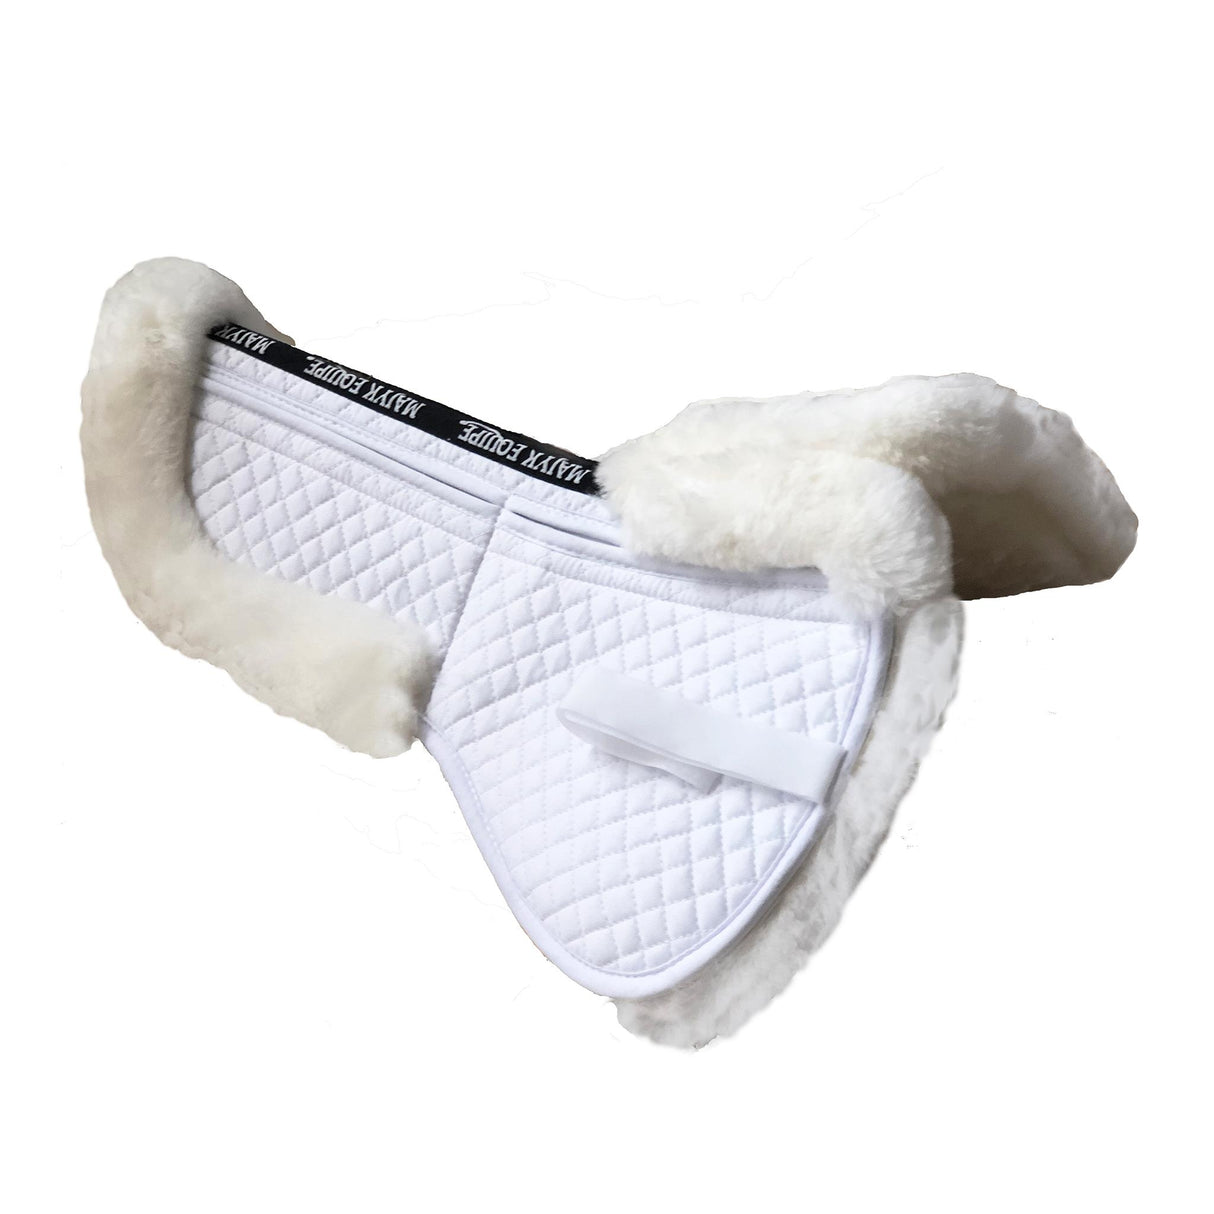 Majyk Equipe Half Pad Correction Fleece with Wither Relief - White